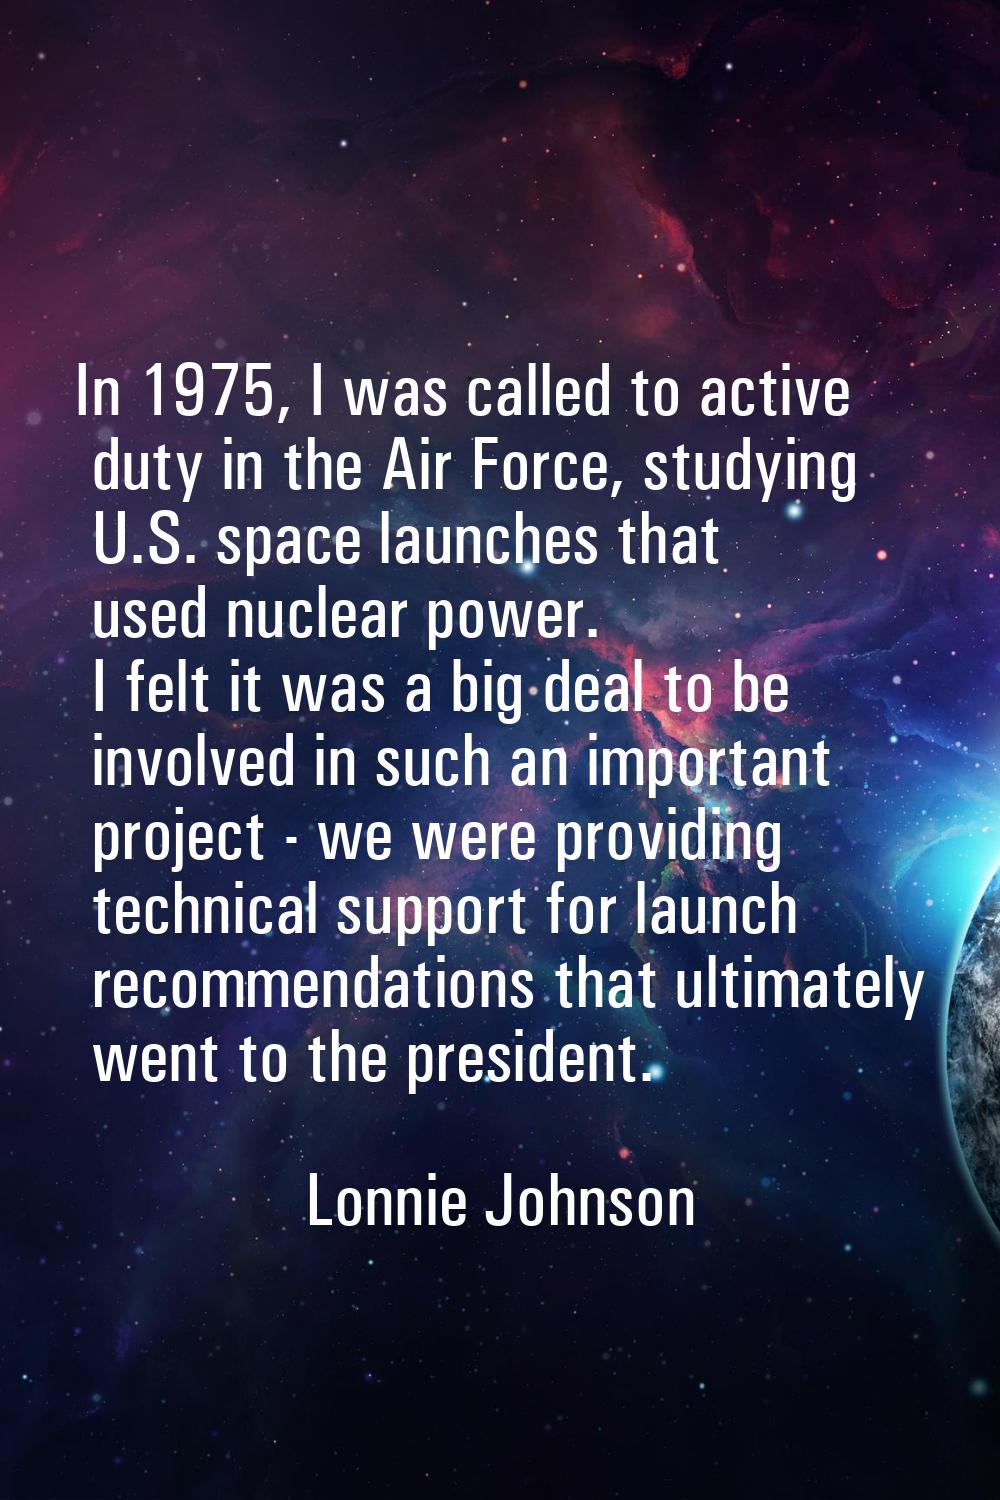 In 1975, I was called to active duty in the Air Force, studying U.S. space launches that used nucle